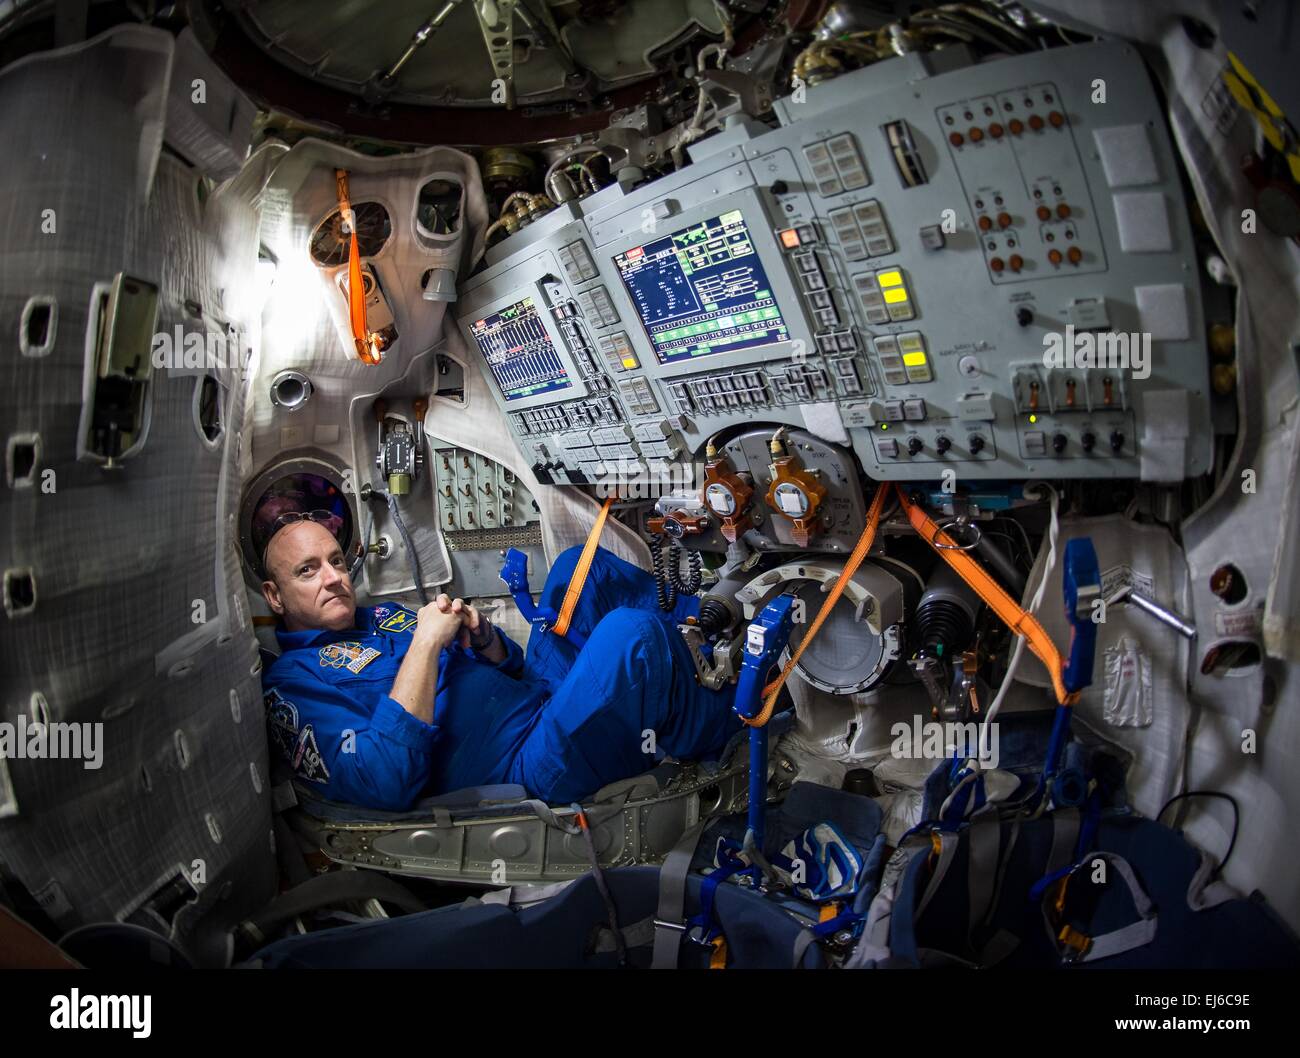 International Space Station Expedition 43 Commander NASA Astronaut Scott Kelly sits inside the Soyuz simulator at the Gagarin Cosmonaut Training Center March 5, 2015 in Star City, Russia. Kelly will launch aboard the Soyuz spacecraft March 28th for a one-year mission. Stock Photo